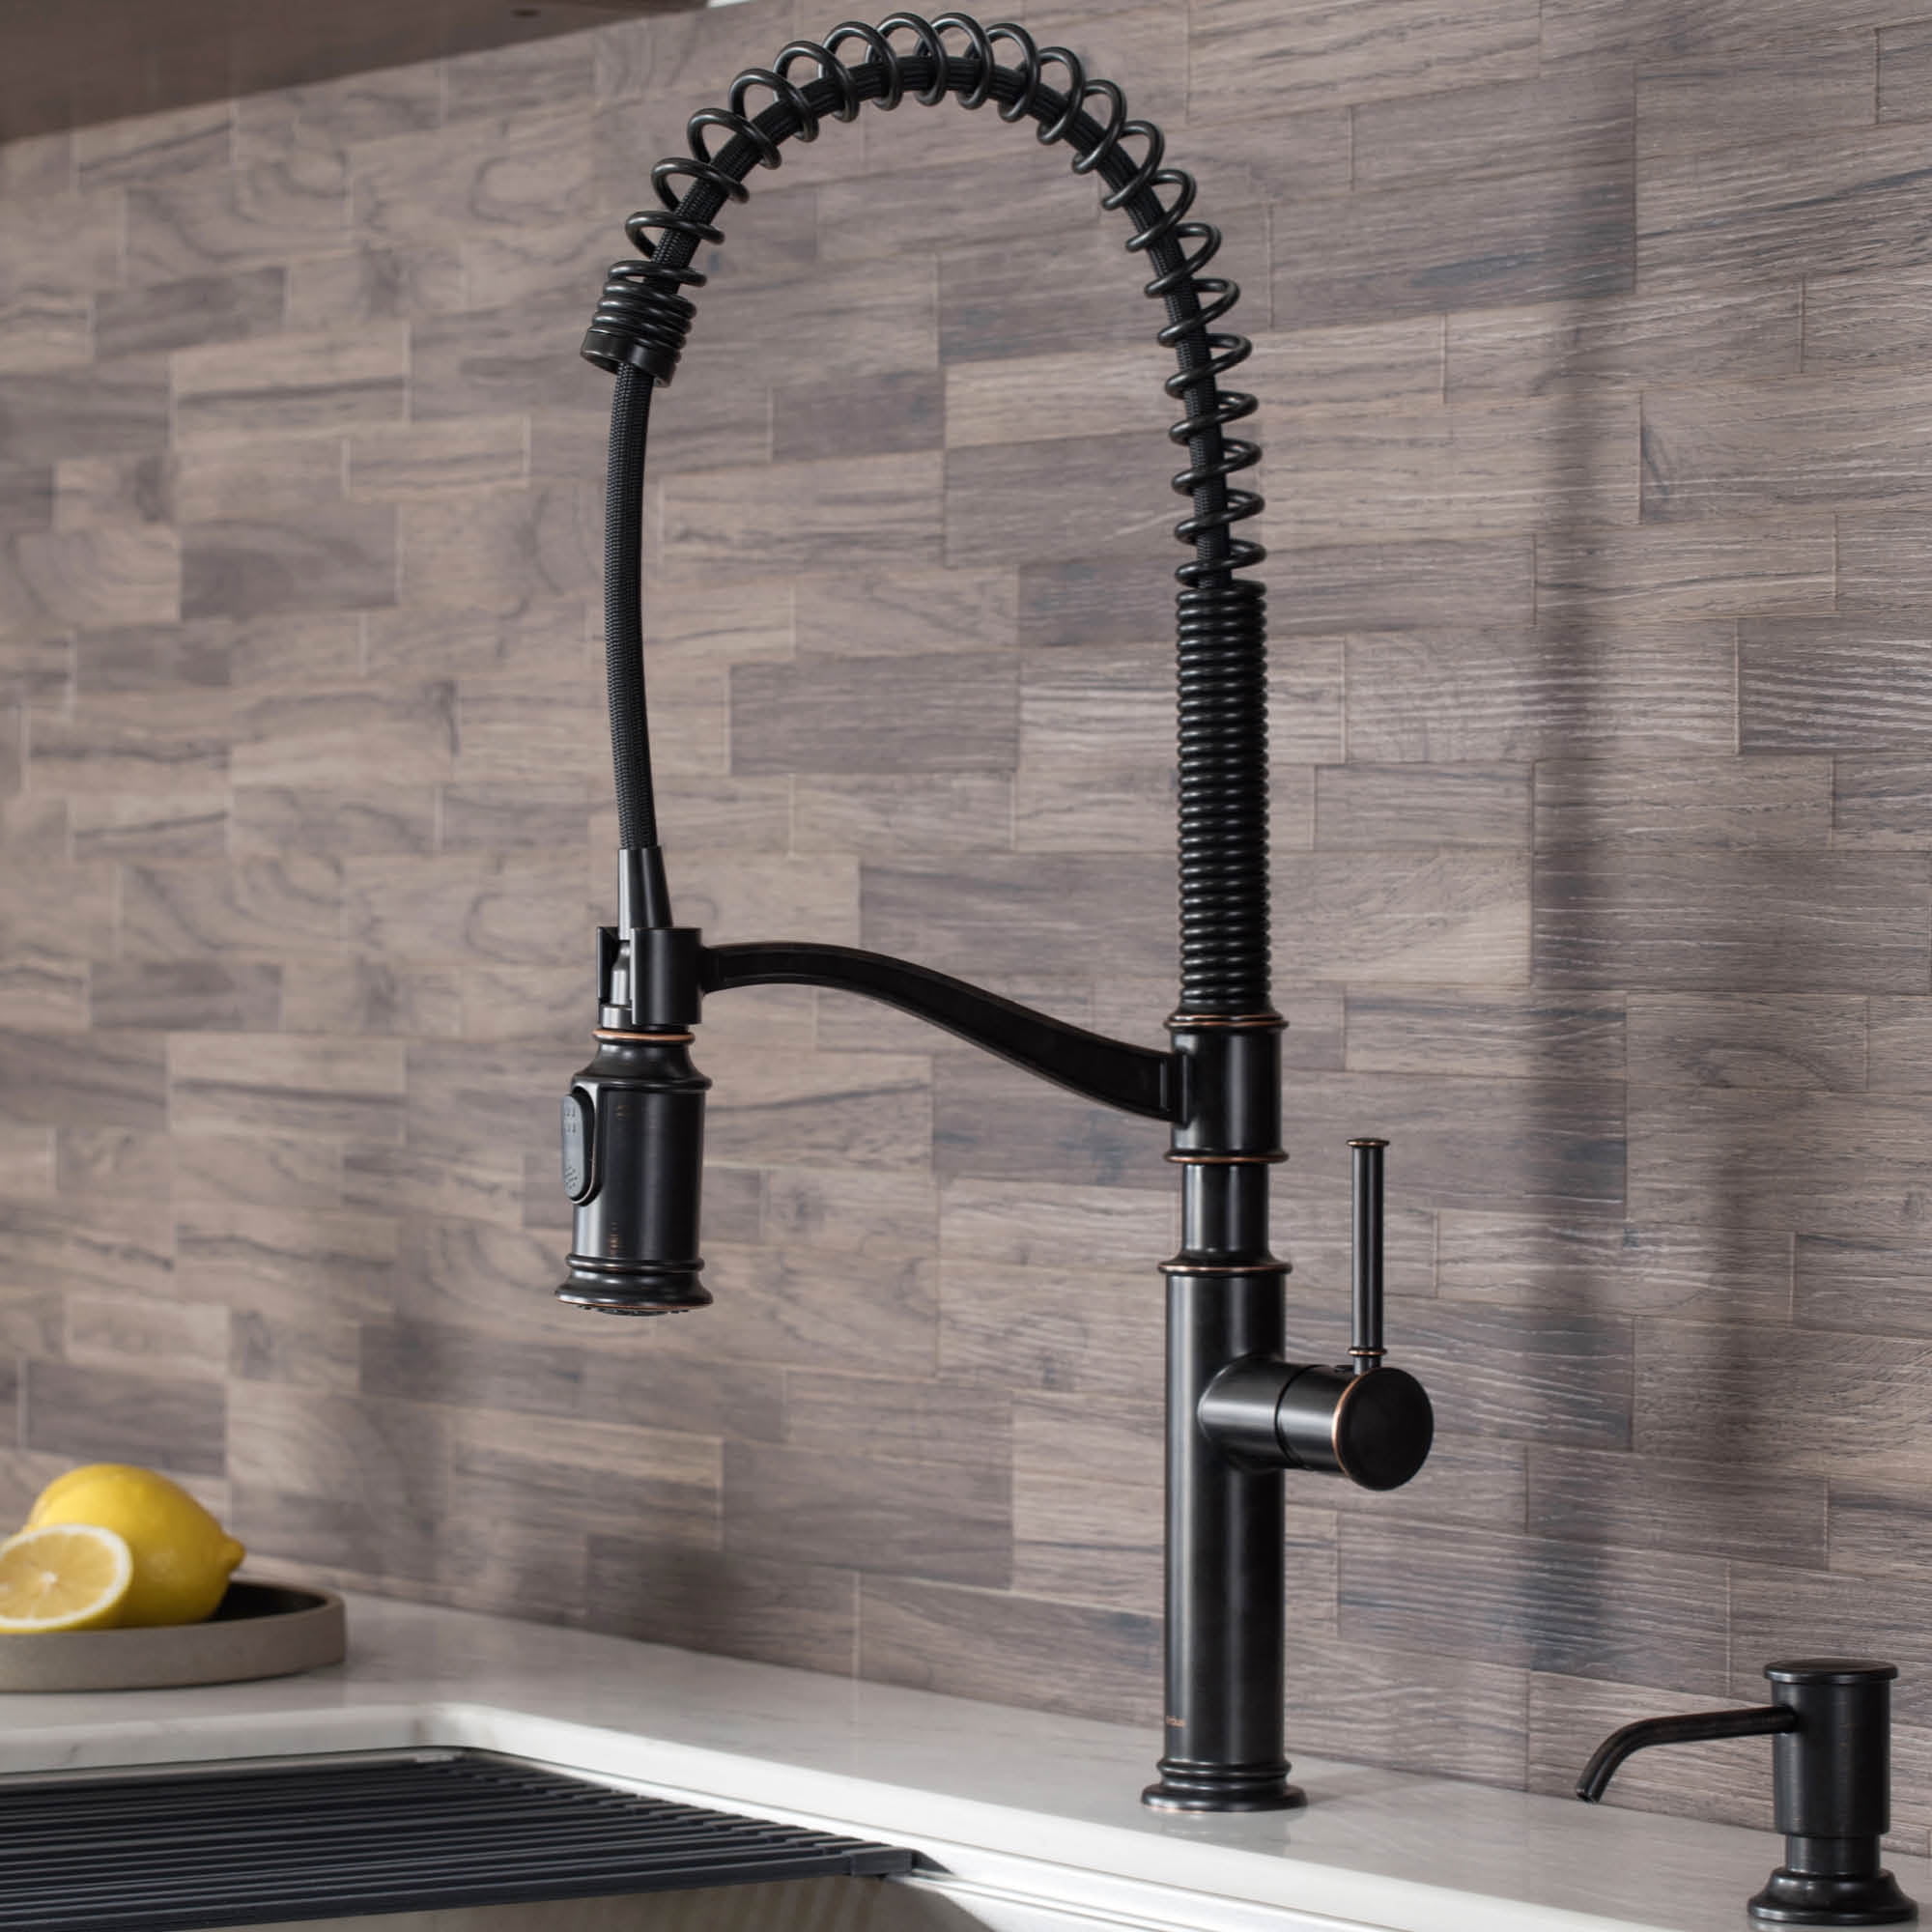 Kraus Sellette Commercial Style Pull Down Kitchen Faucet In Oil Rubbed Bronze C05fa640 A4fd 40bf Aa5b 73f0f73c2f72 1.7c735f7012e056c1a0a2496c9547cc3e 